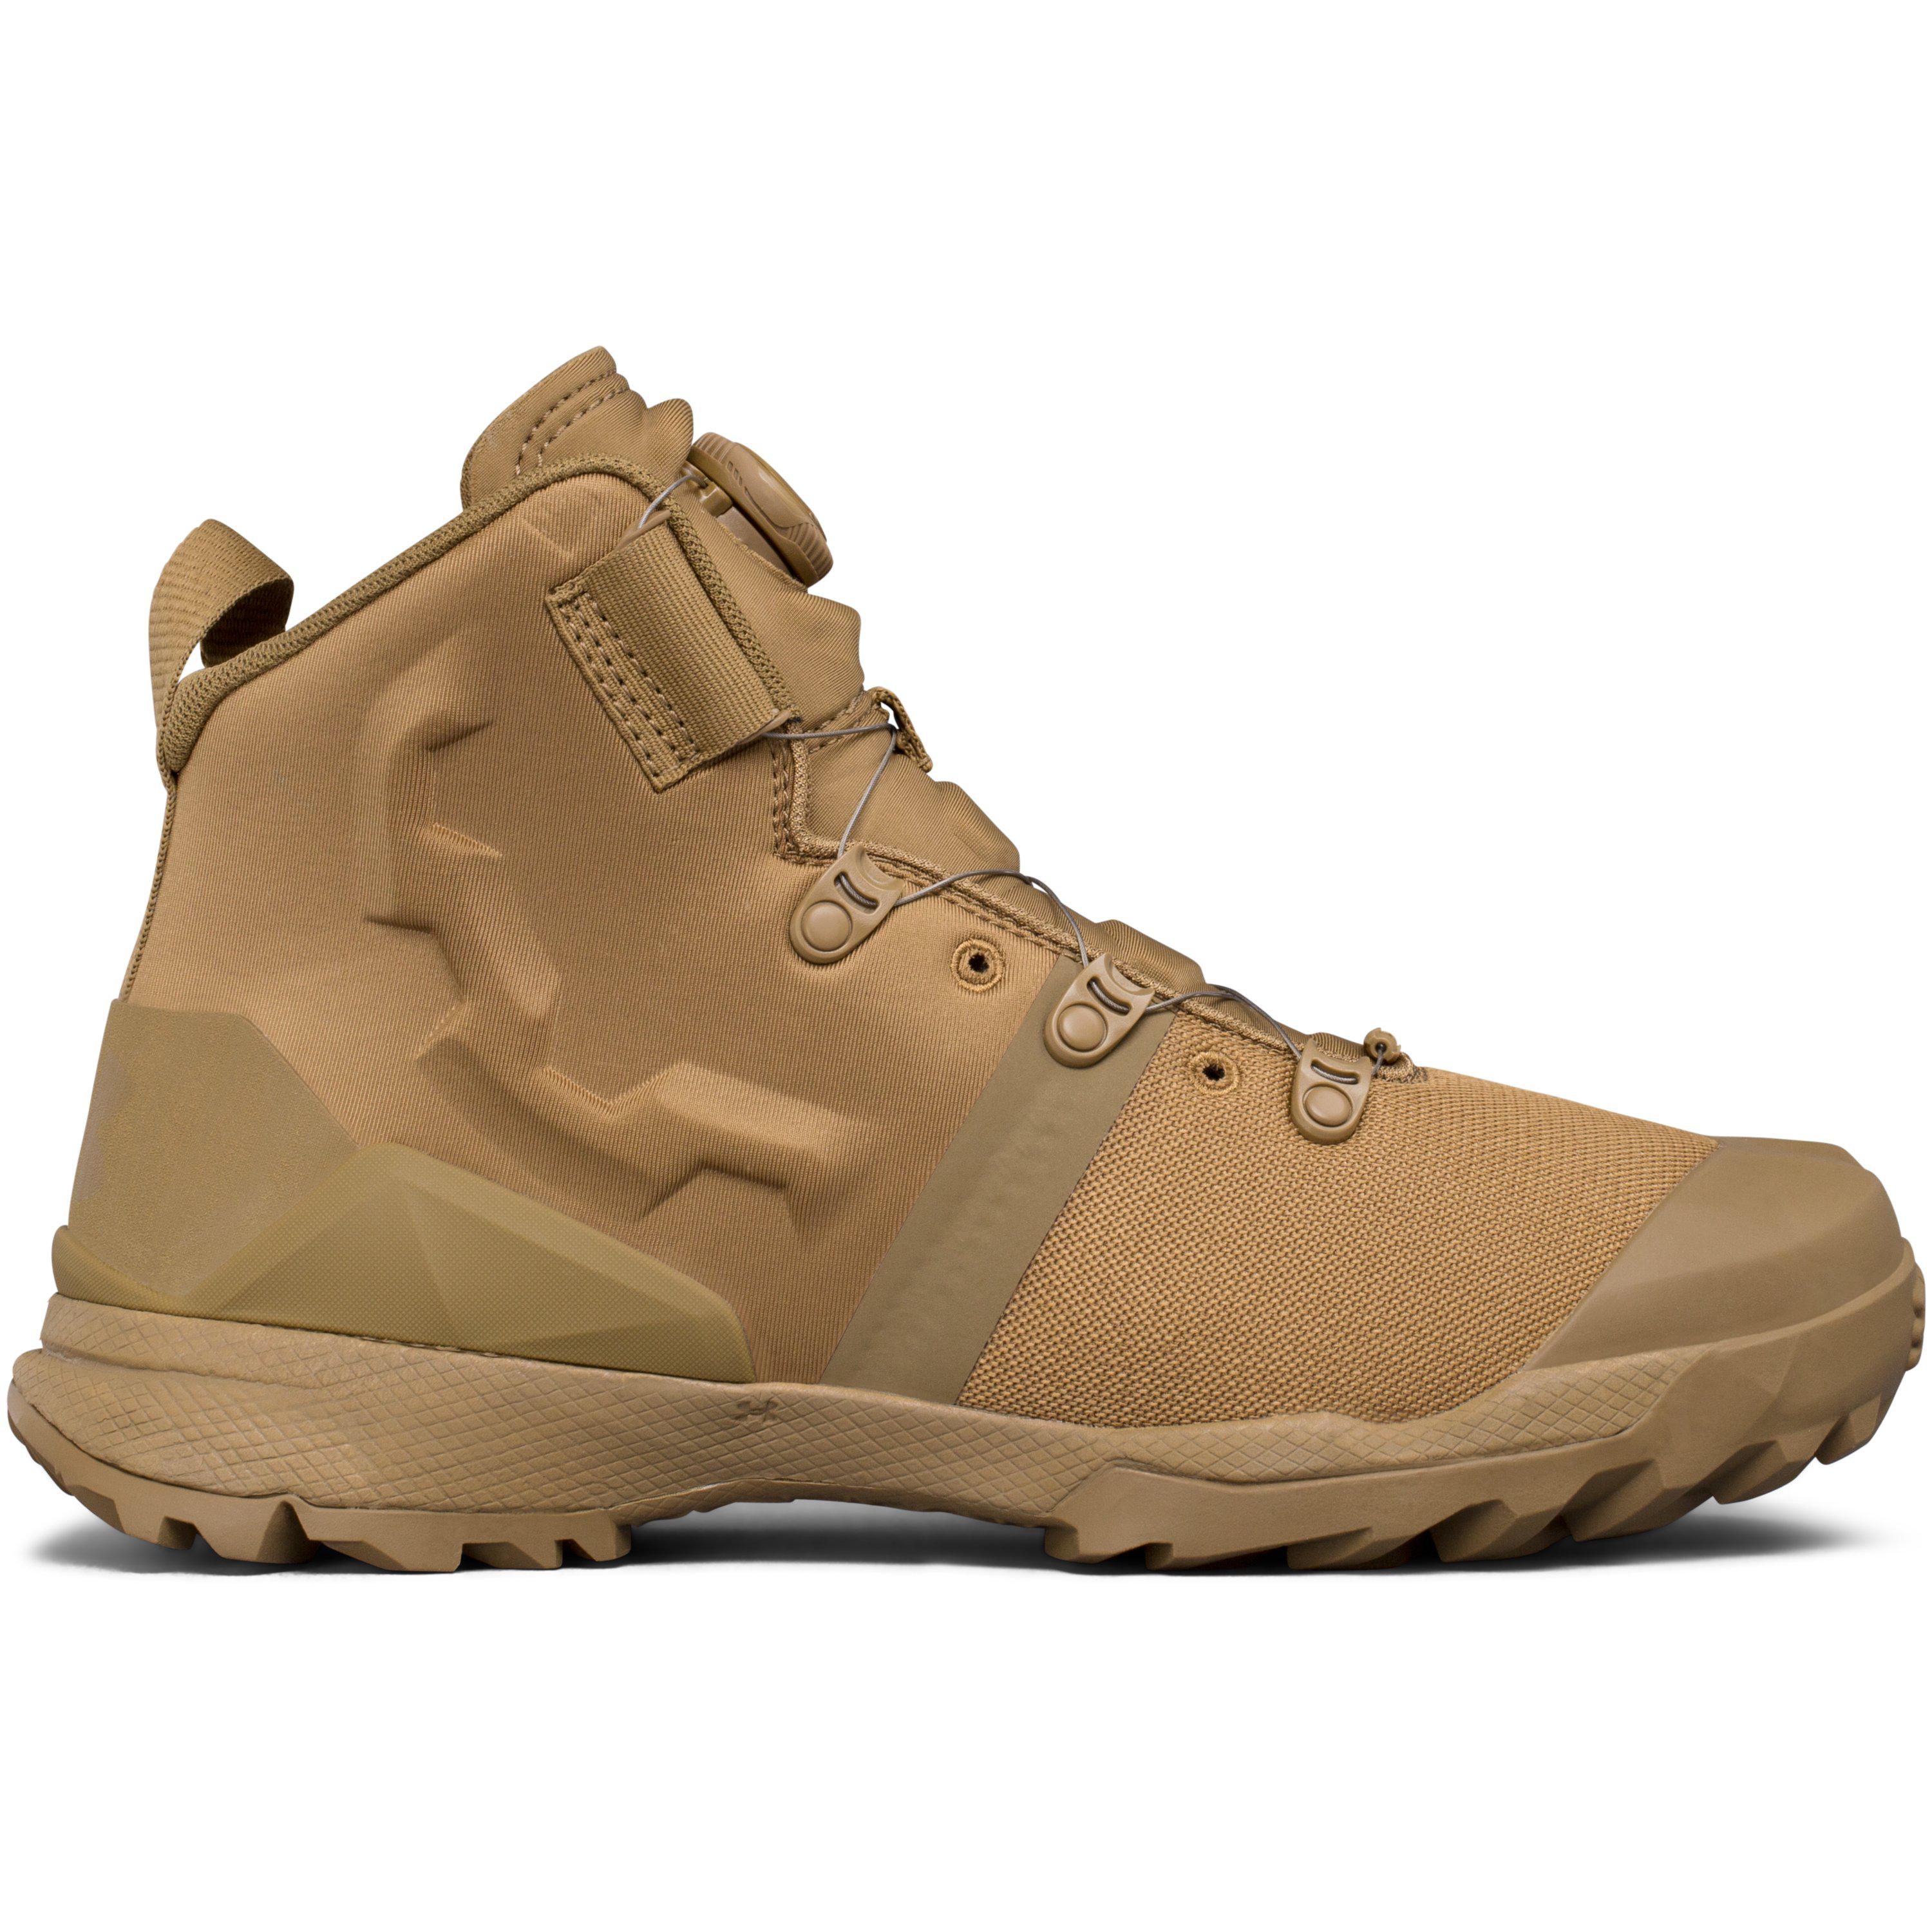 Under Armour Coyote Brown Military Boots | rededuct.com